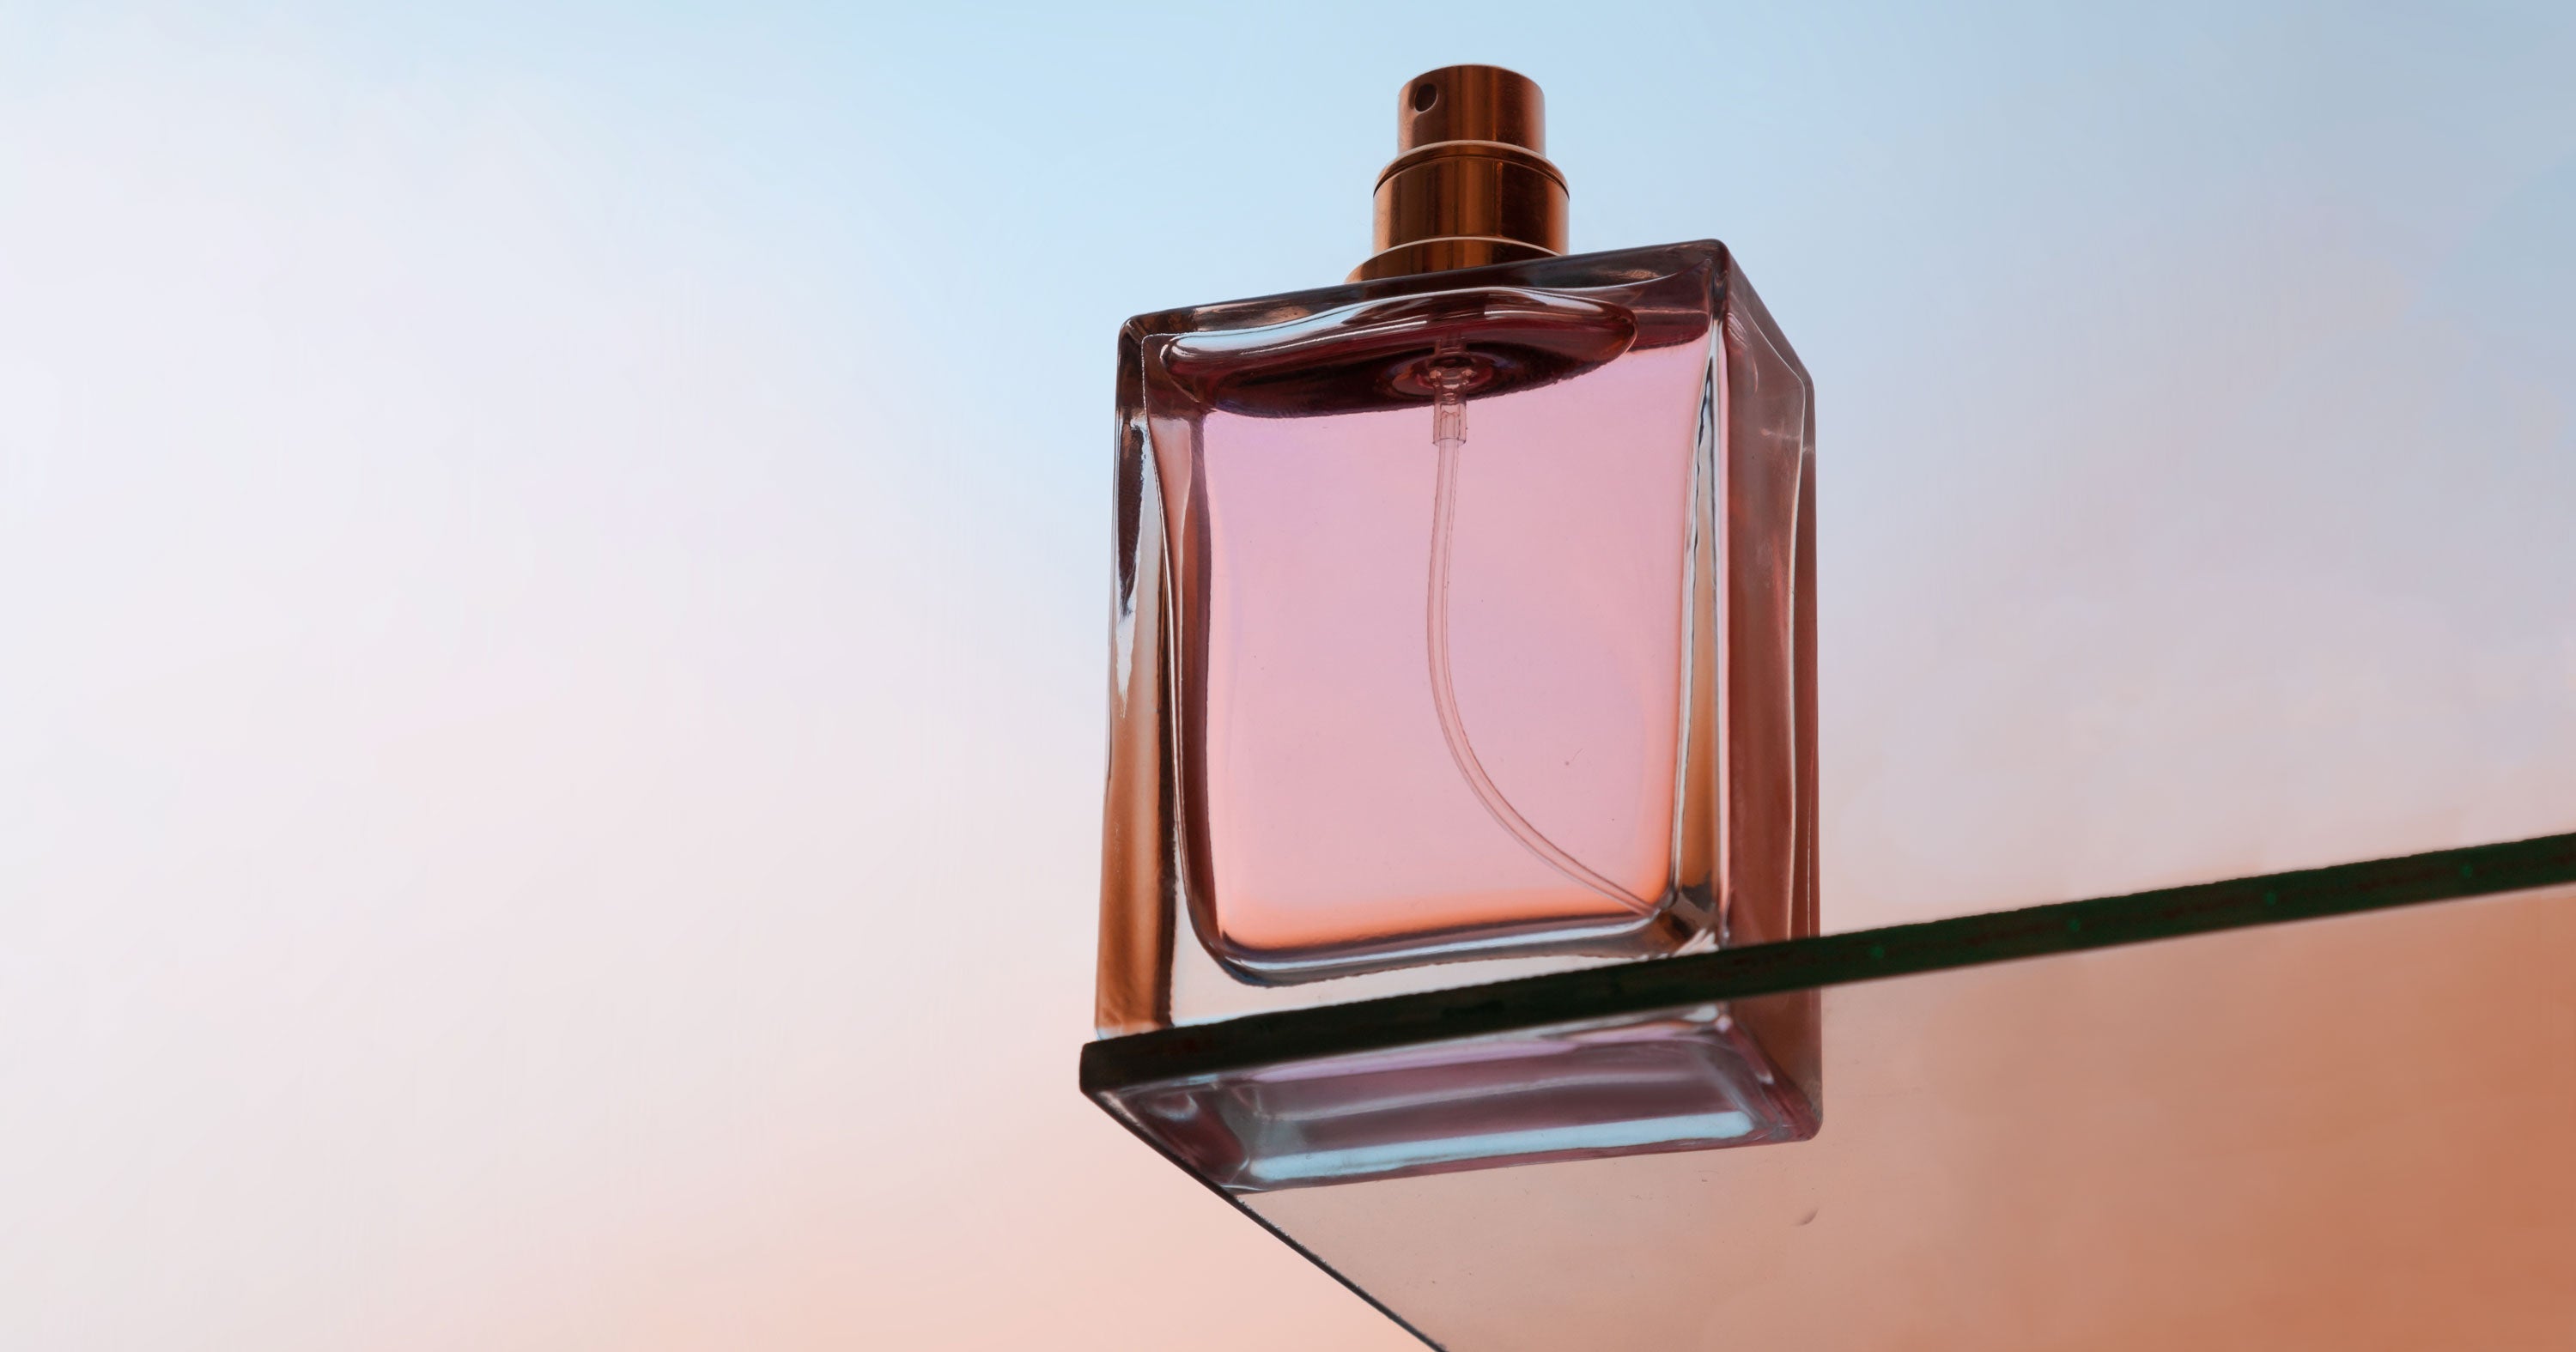 Why Do People “Gatekeep” Their Perfume? An Investigation